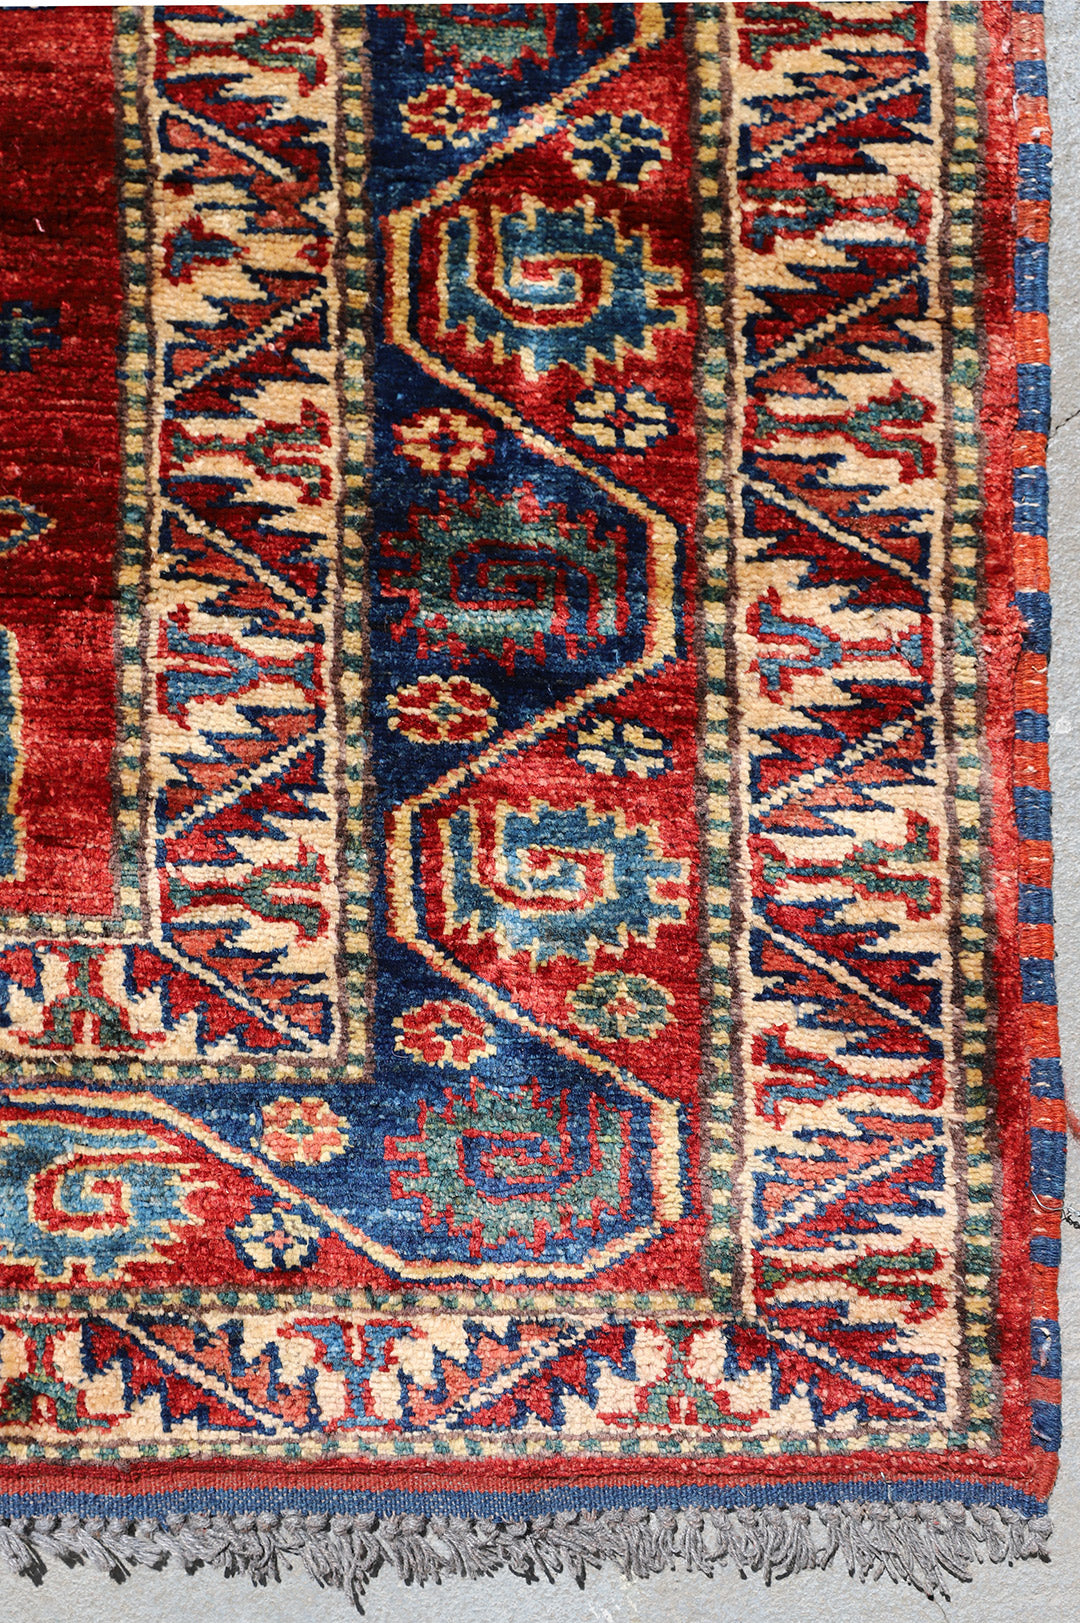 4'x6' Fine Wool Hand Knotted Red and Blue Geometric Caucasian Design Rug